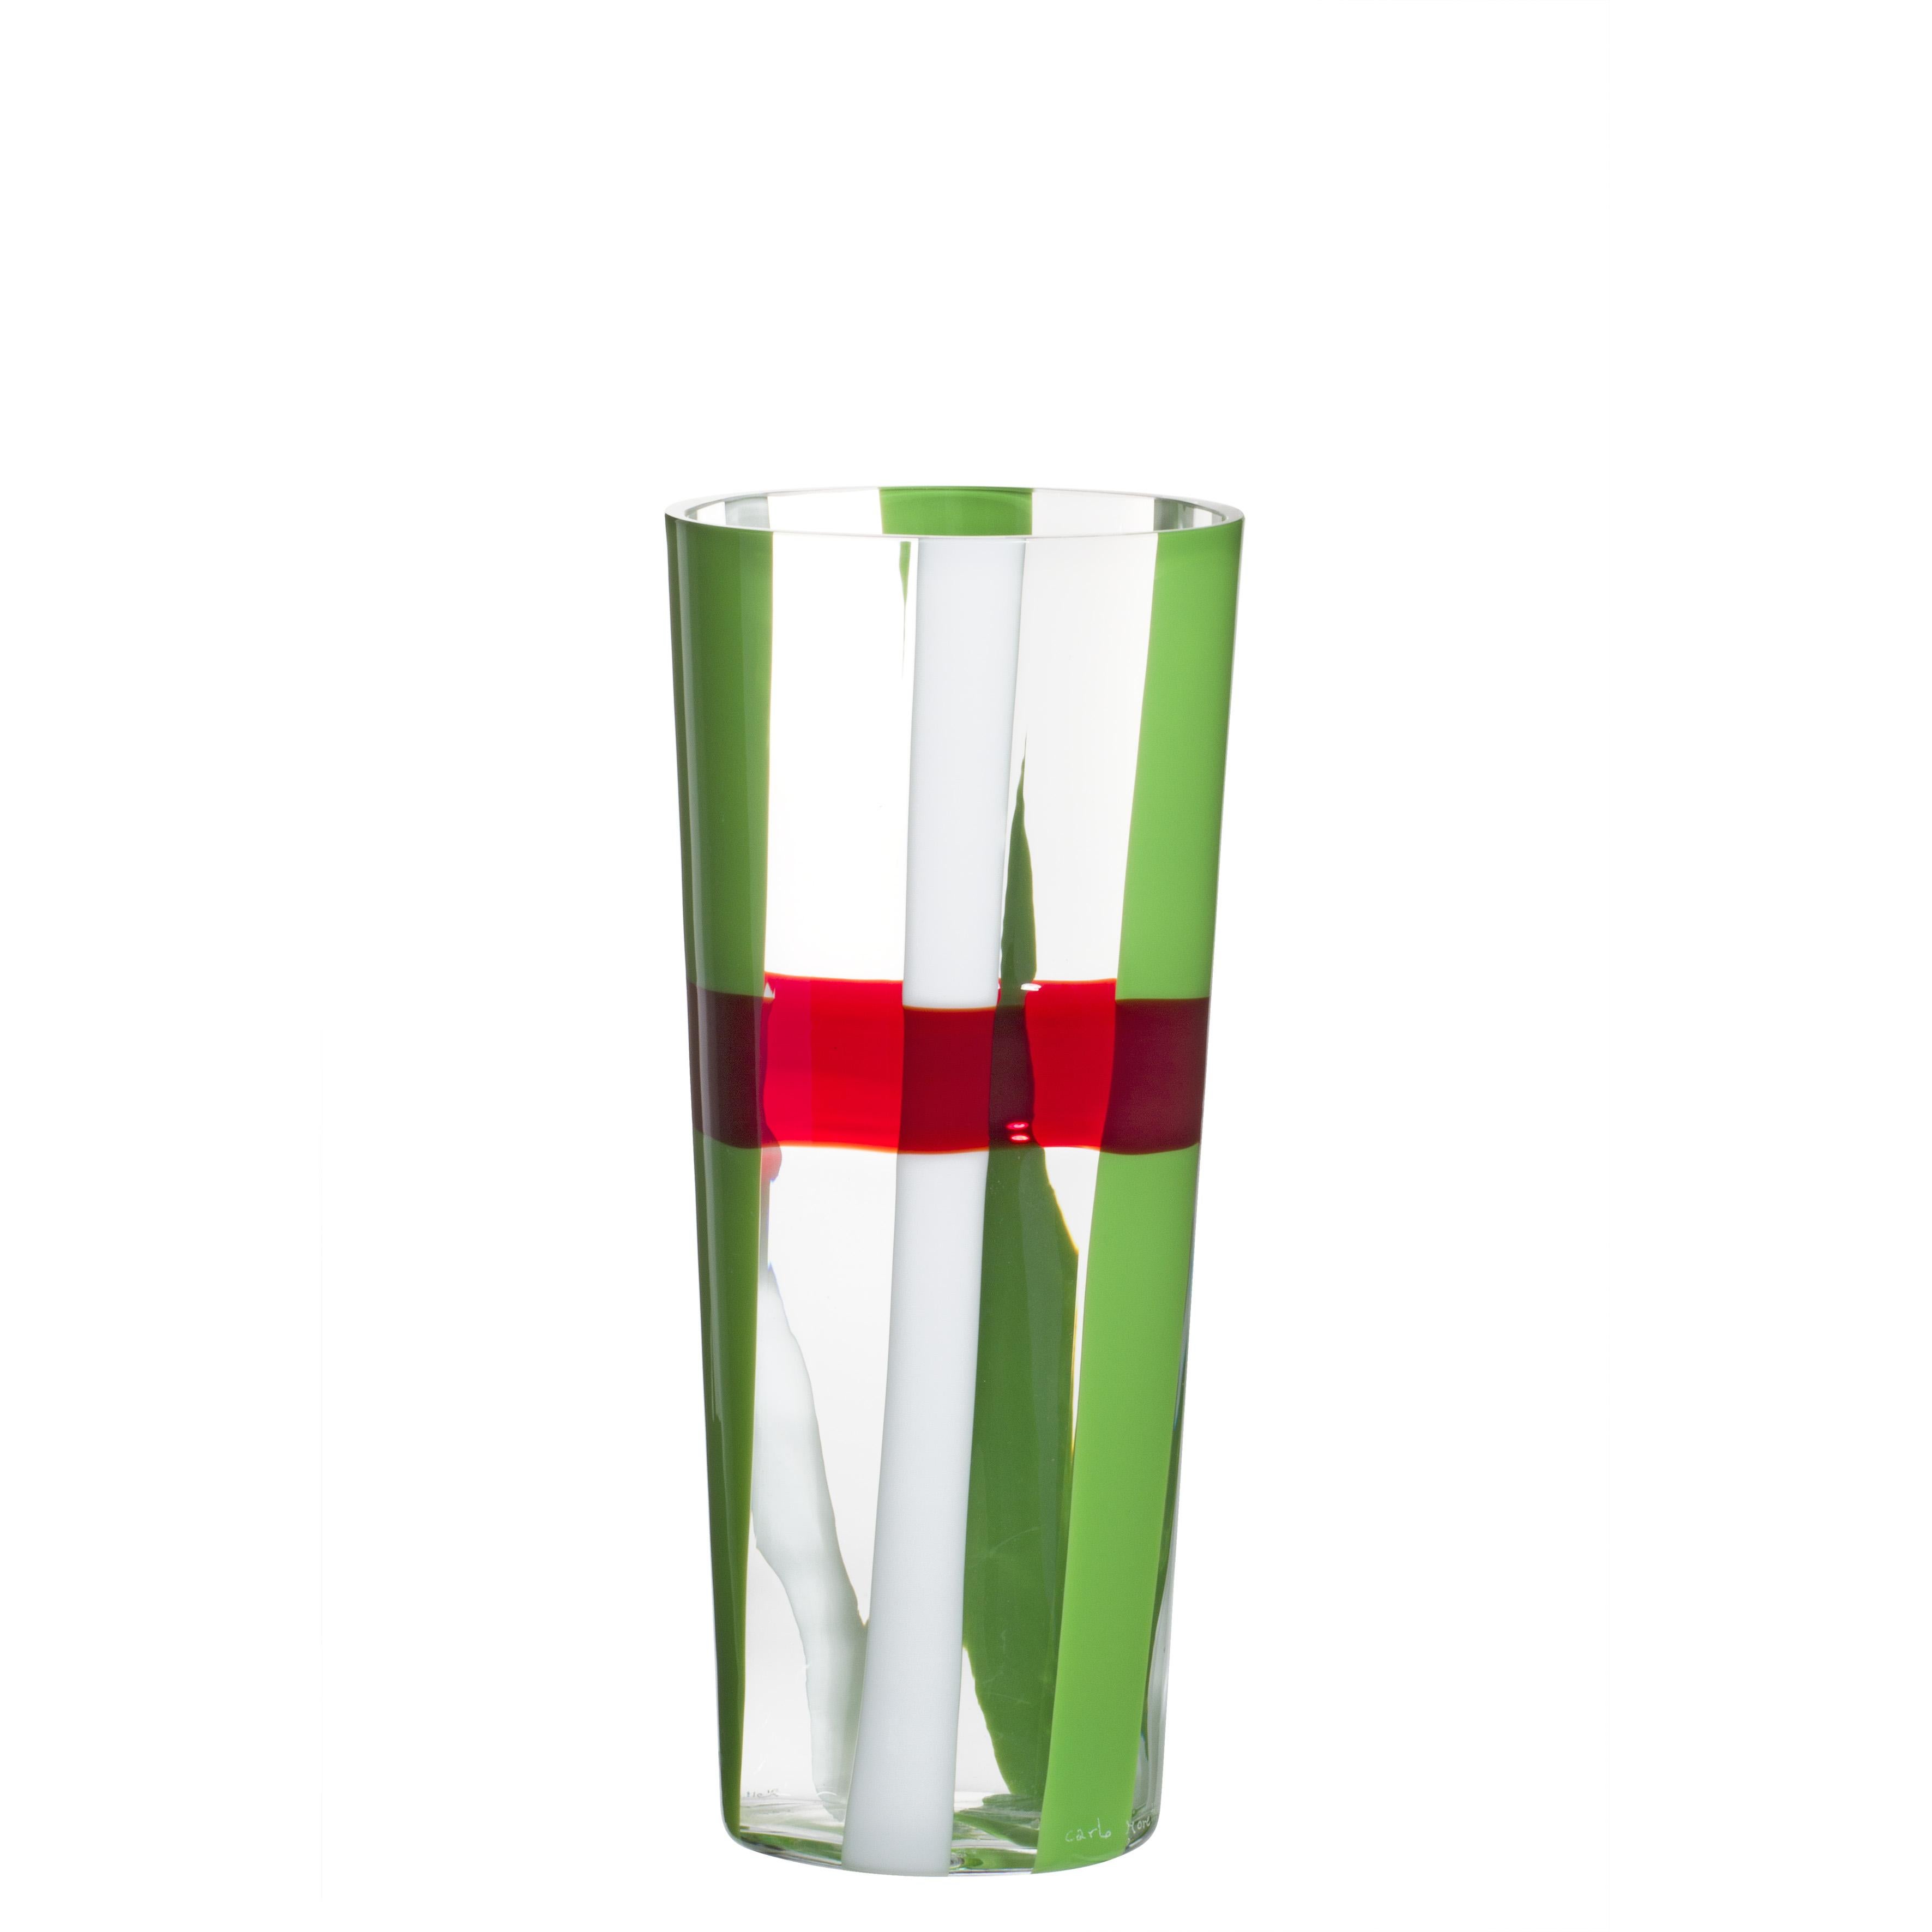 Small Troncocono Vase in Red and Green by Carlo Moretti For Sale